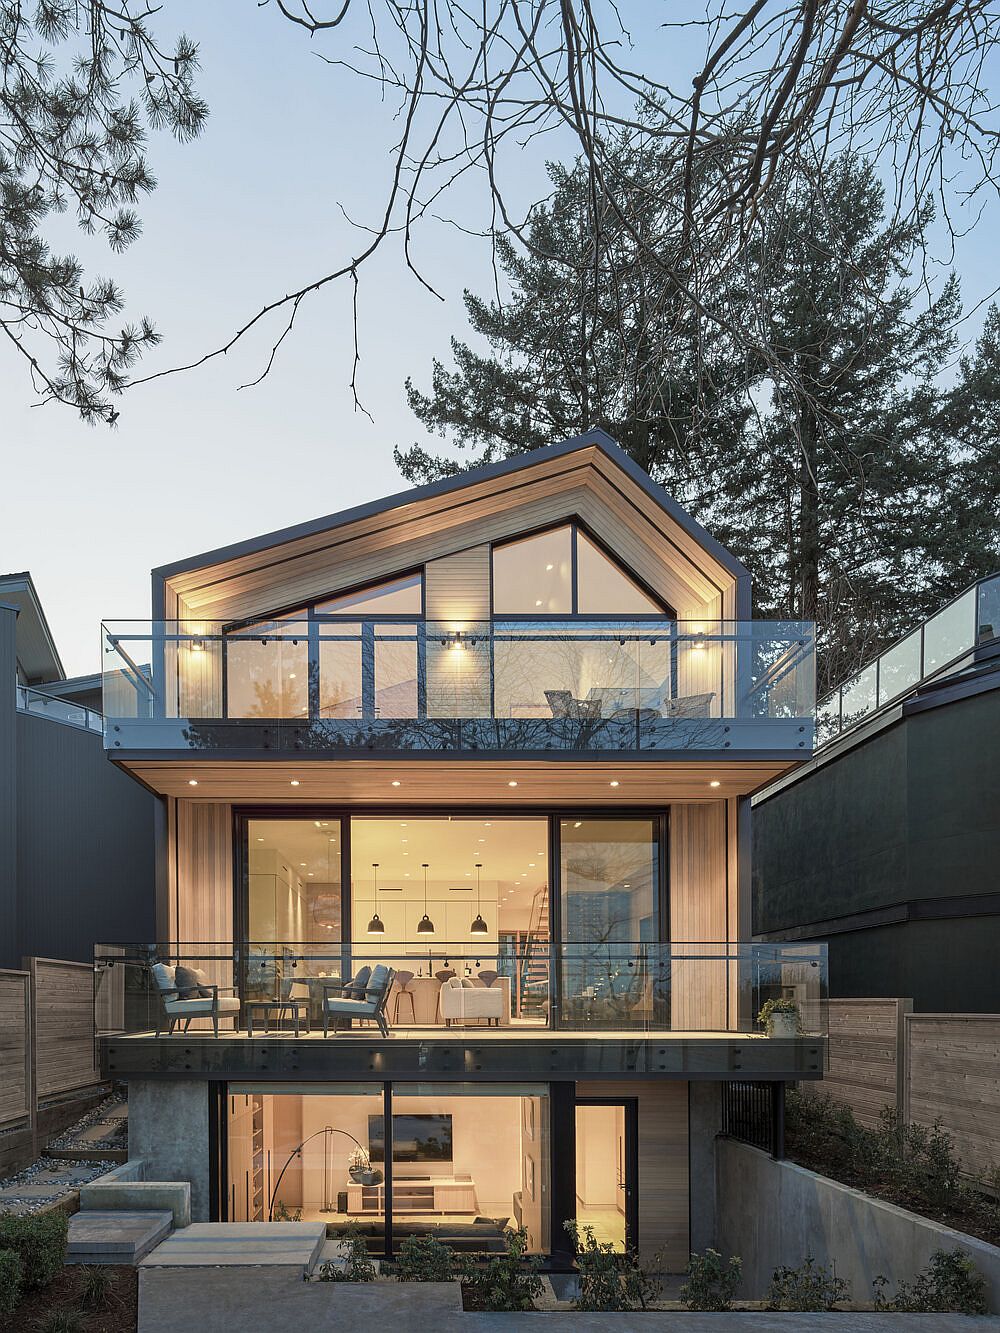 Three levels of the modern Vancouver home in wood, glass and white